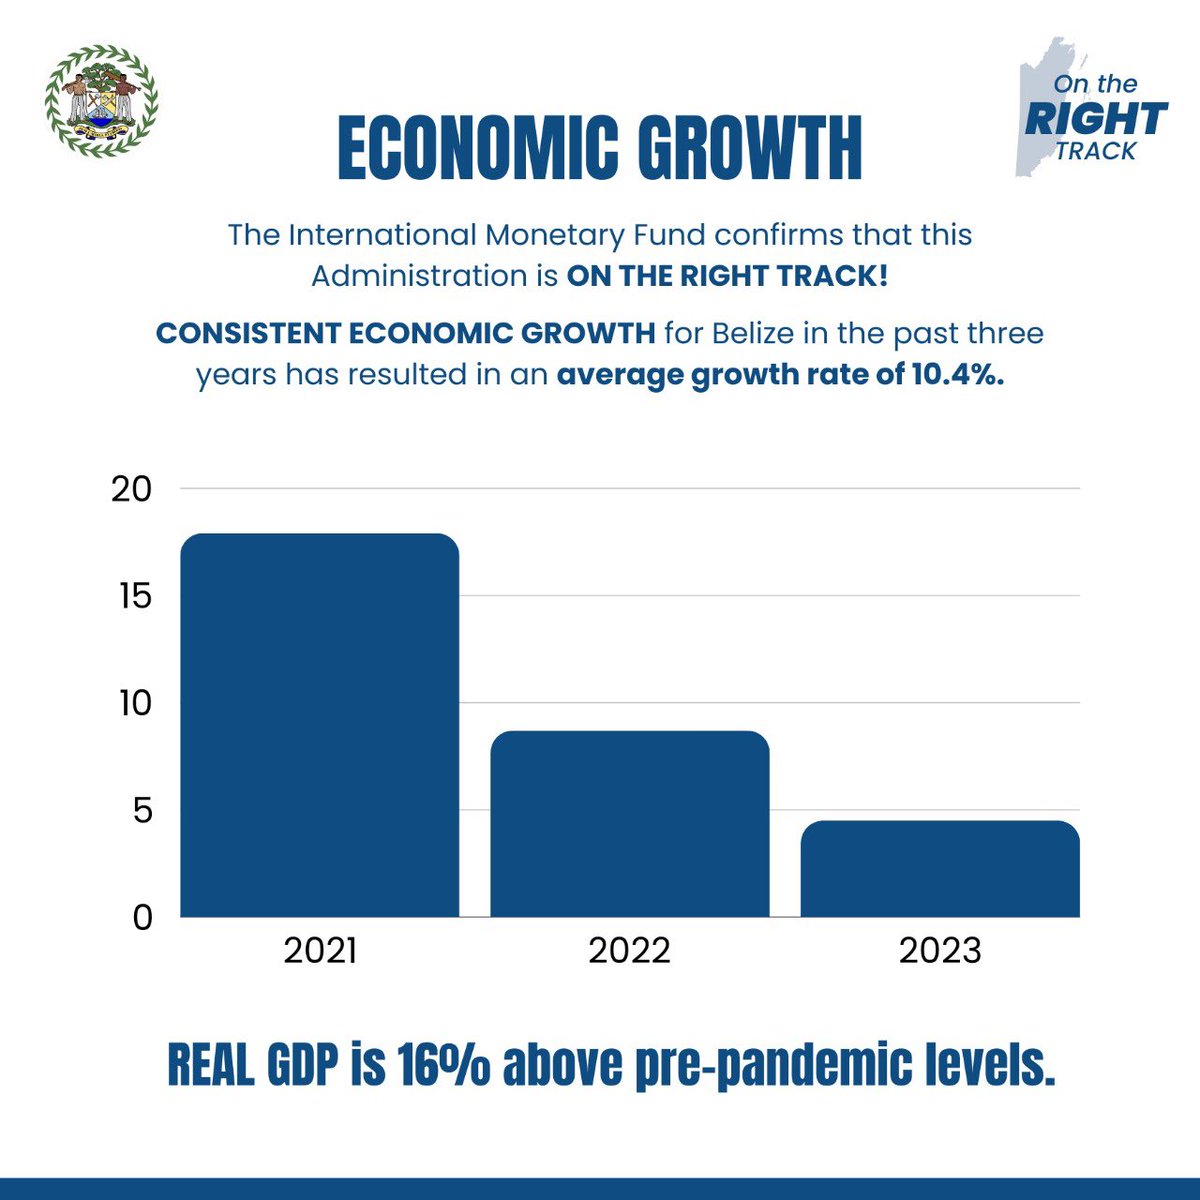 We're on the right track... unemployment is down and the economy rebounded aggressively in 2021 and 2023/24 show an economy steadily growing. Unemployment down from 14% to 3.4%. The economy growing at a steady 10.4%. Steady hands... steady economic growth... for ALL Belize 🇧🇿.